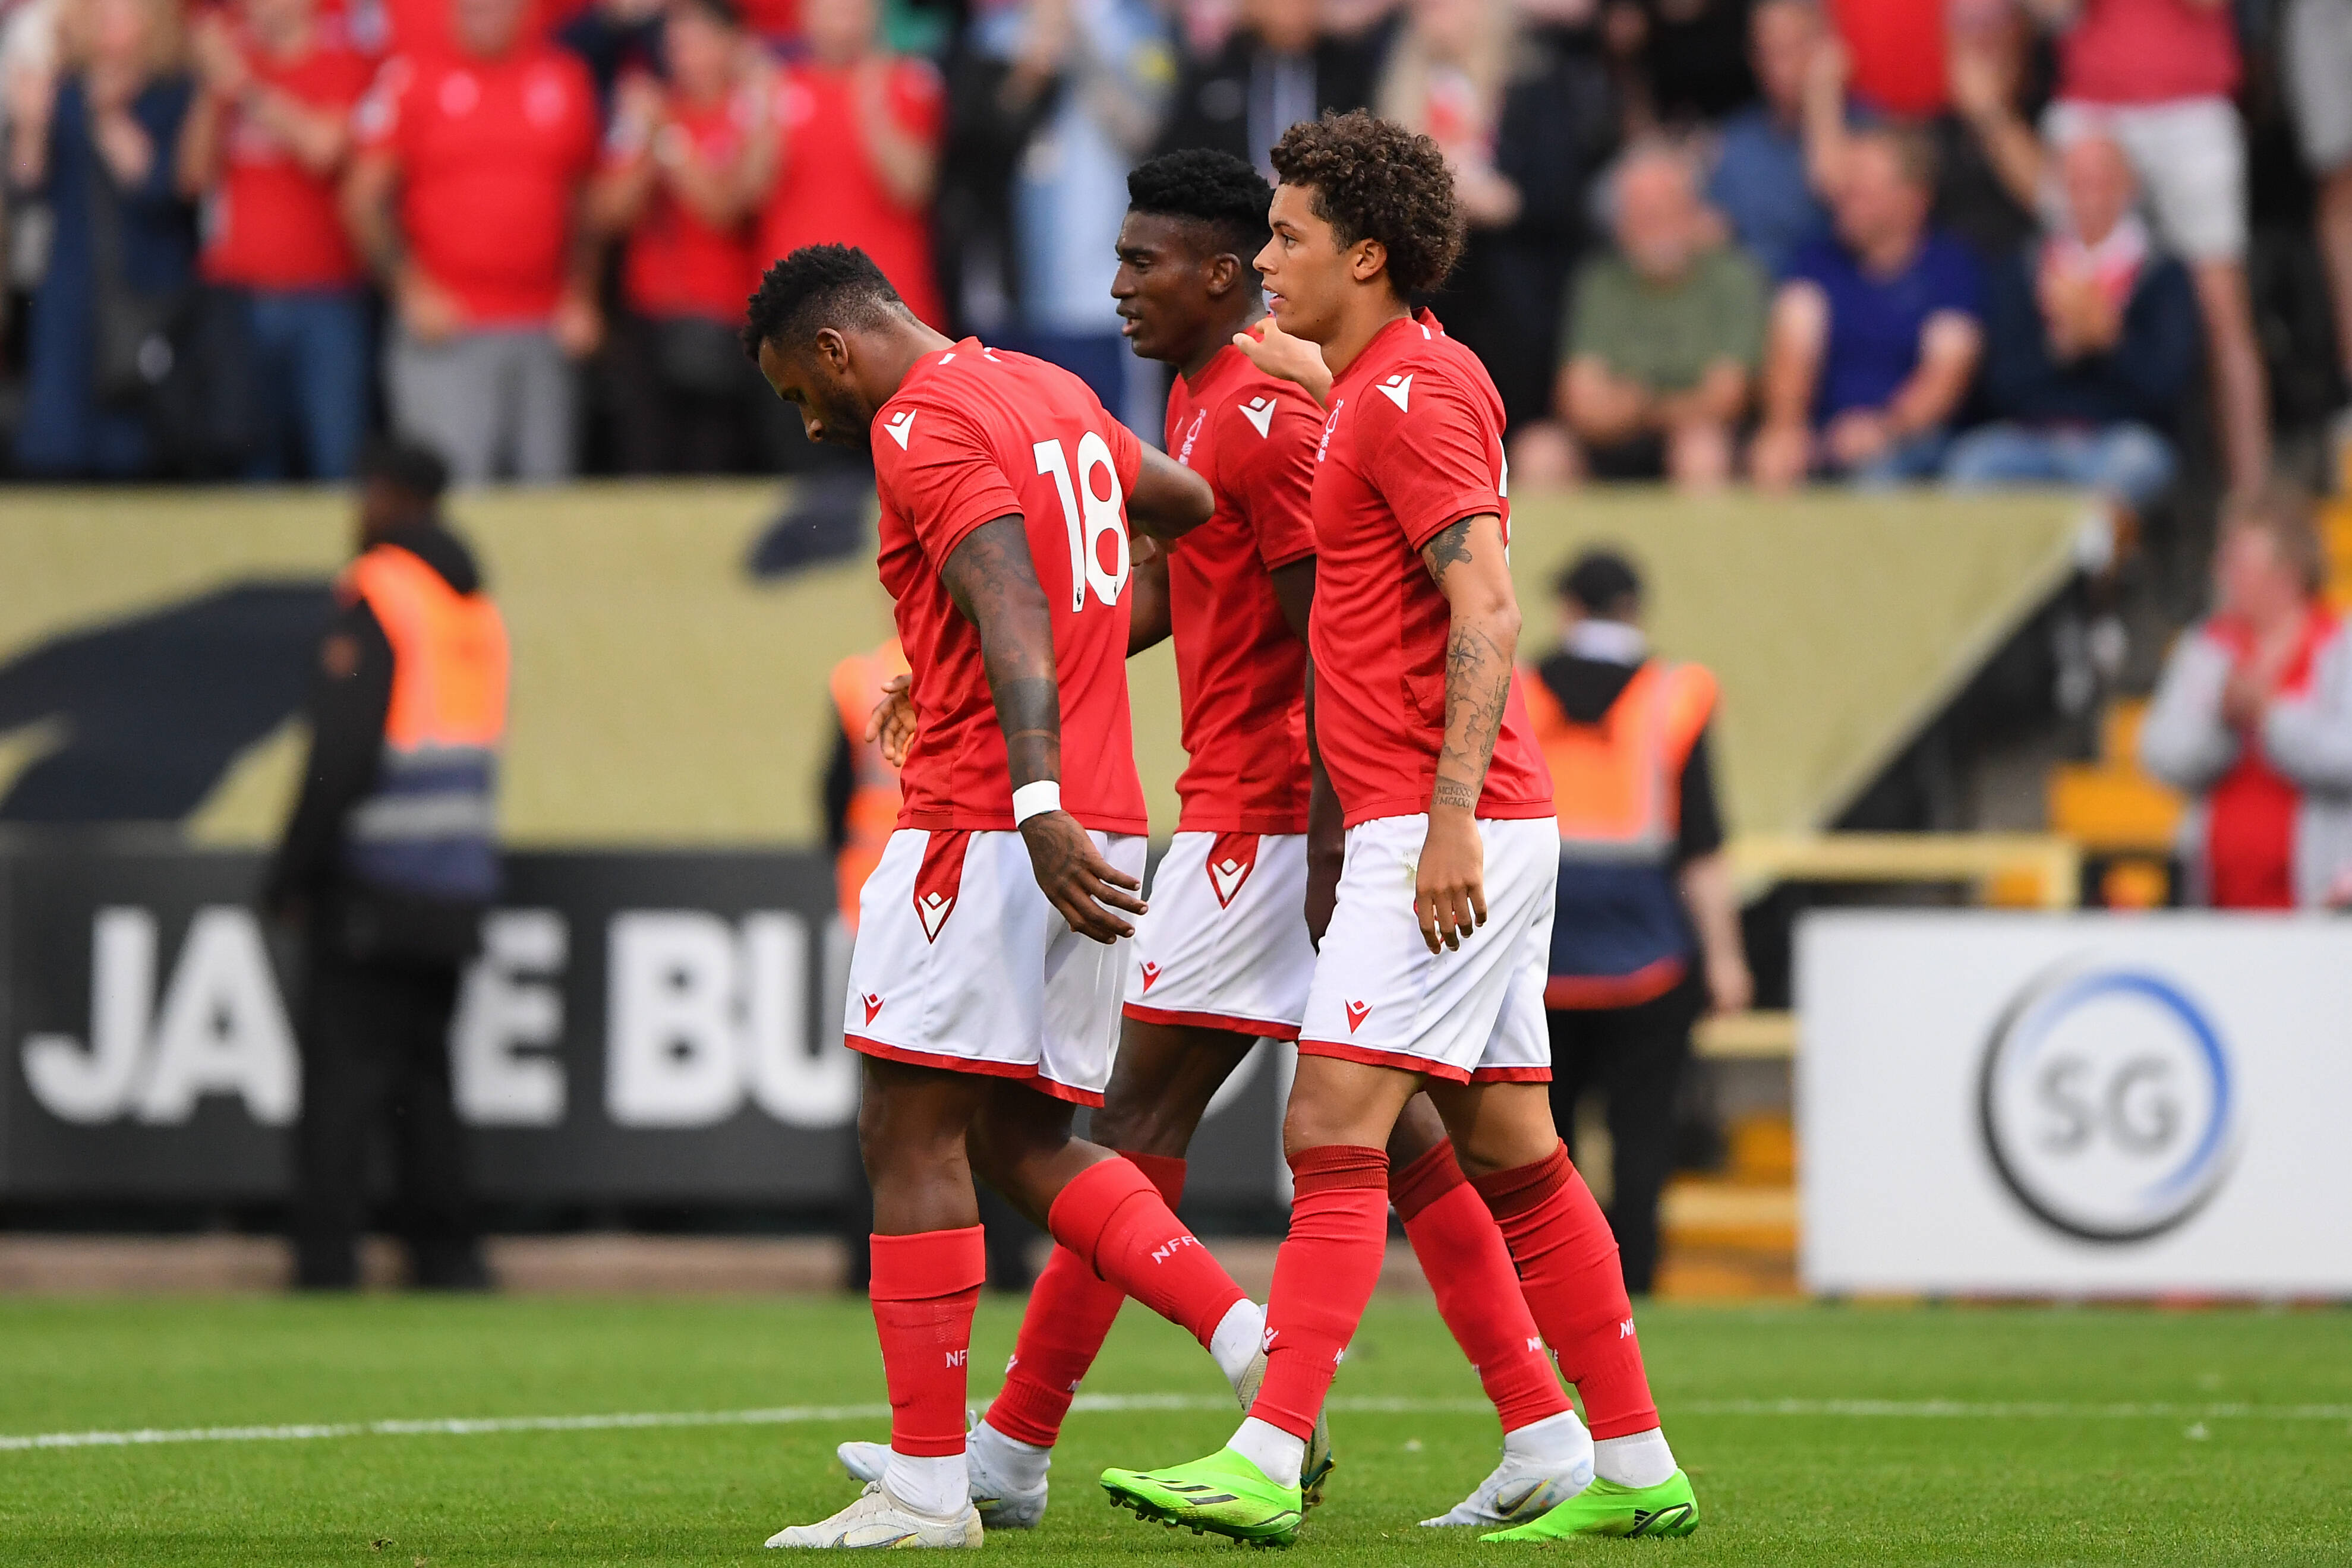 Taiwo Awoniyi will play a key role for Nottingham Forest